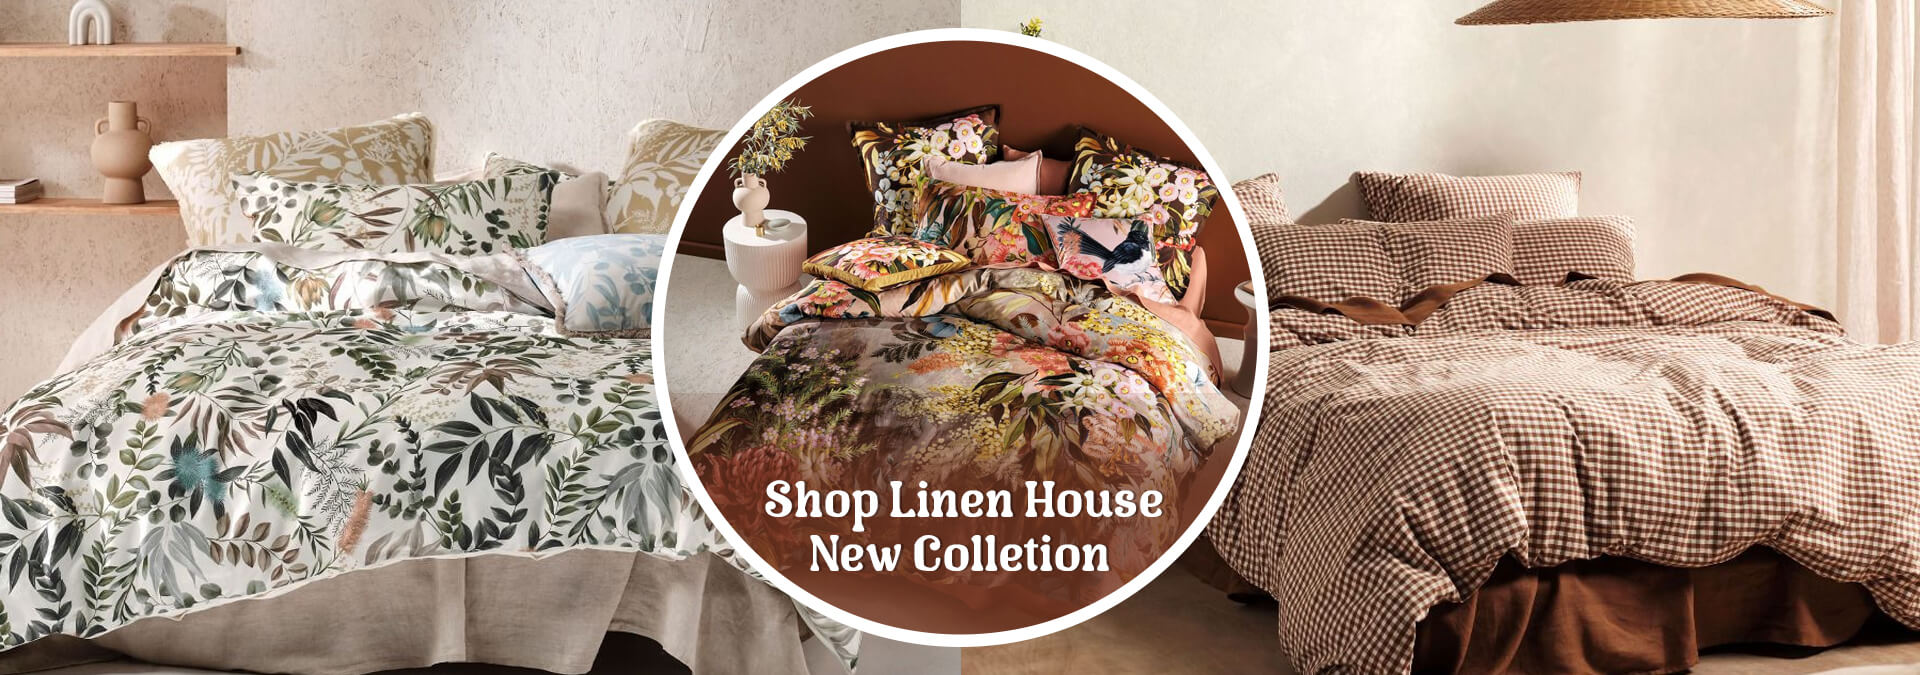 Linen House New Collections